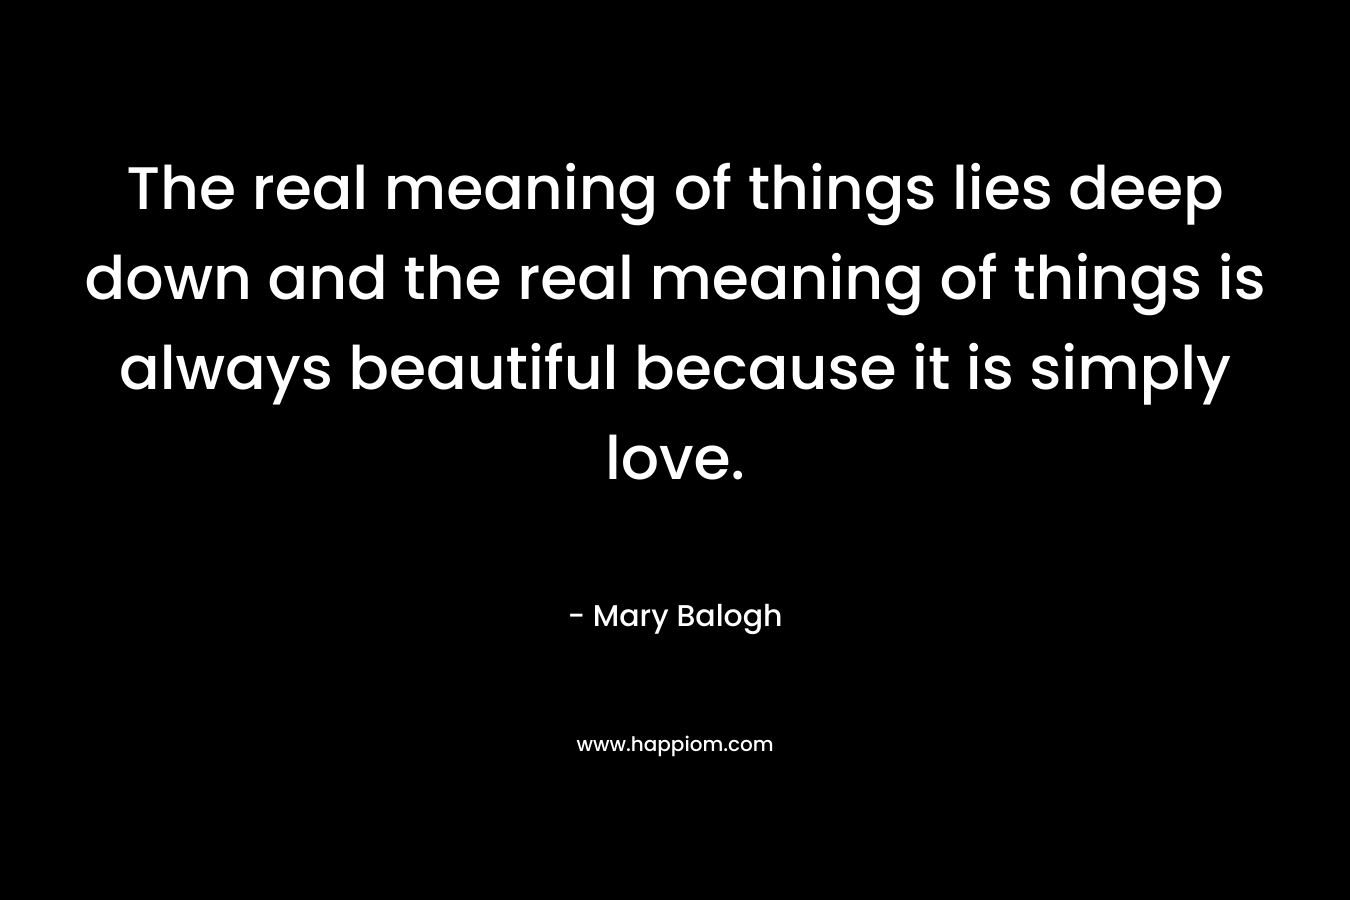 The real meaning of things lies deep down and the real meaning of things is always beautiful because it is simply love.